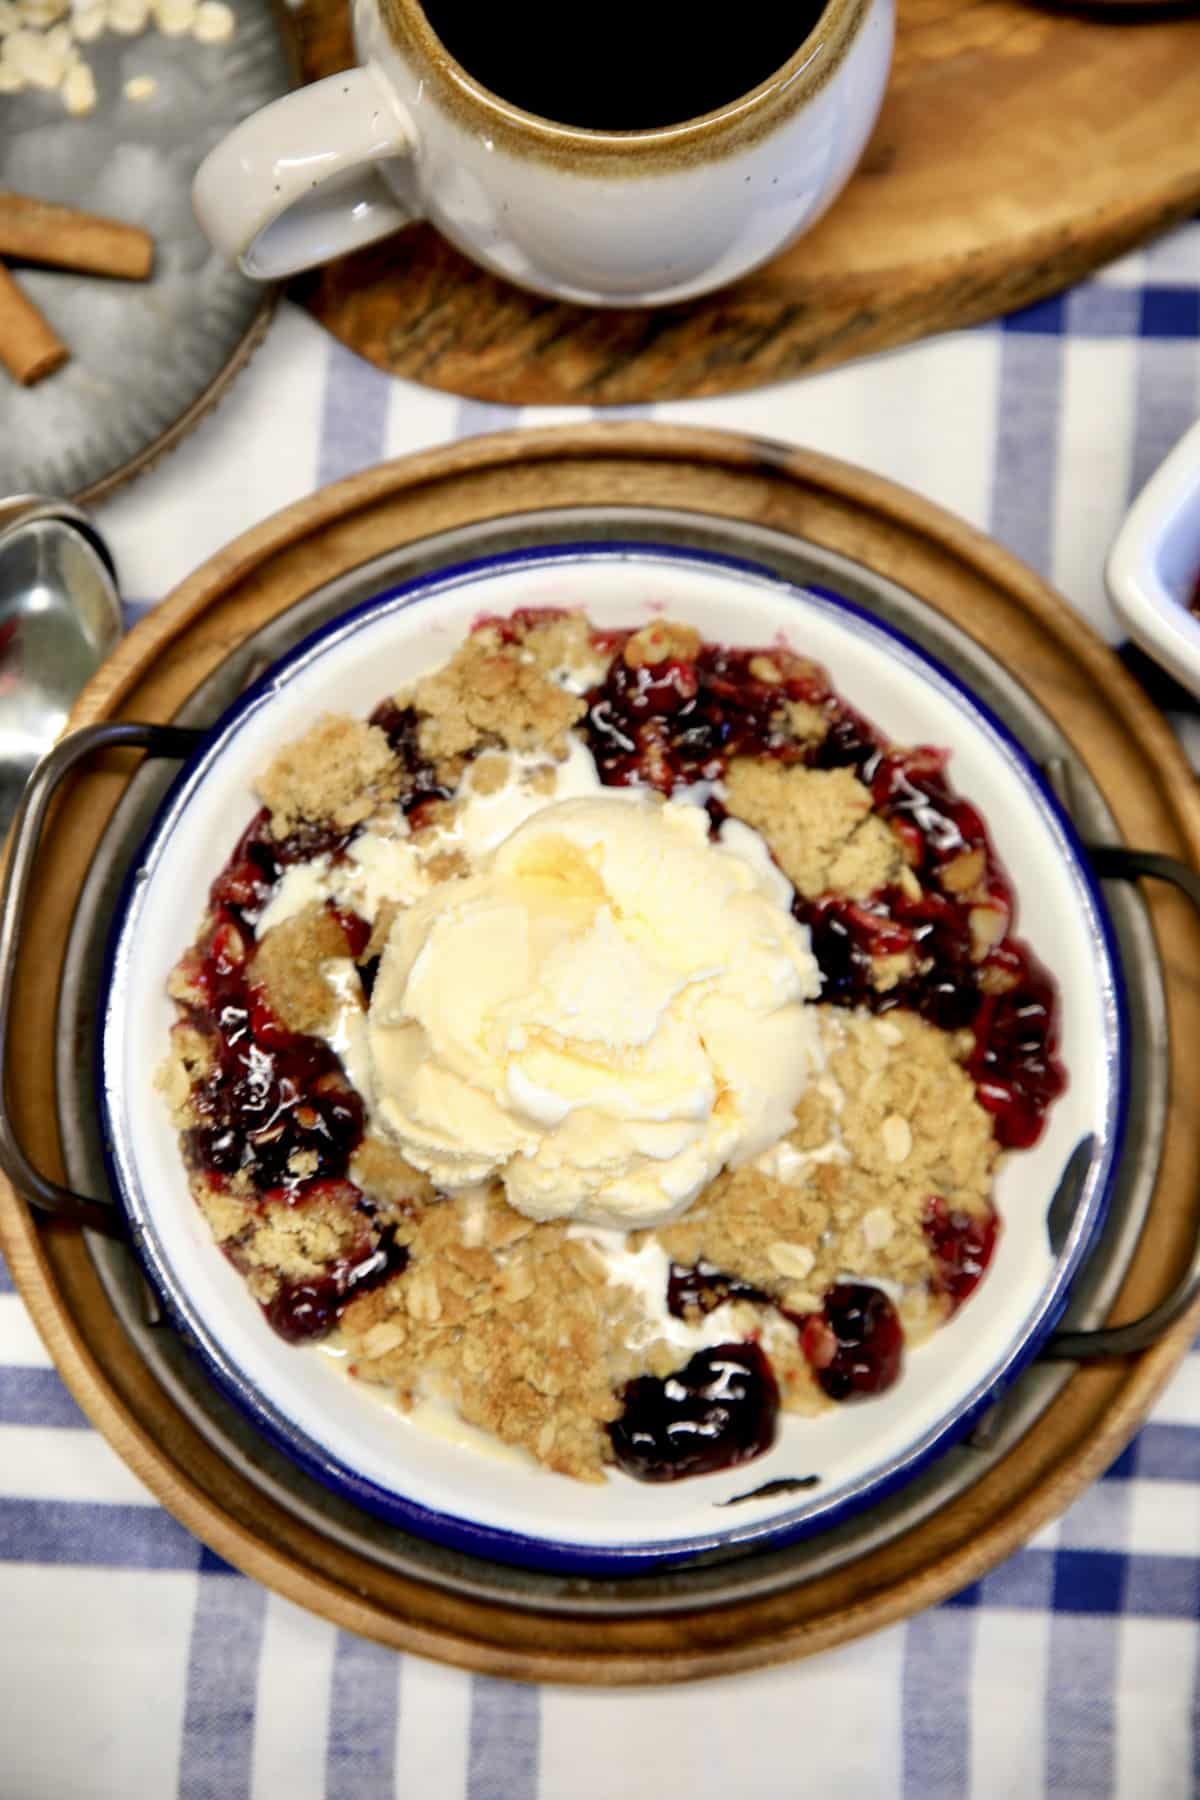 Bowl of blueberry crisp with vanilla ice cream. Cup of coffee.